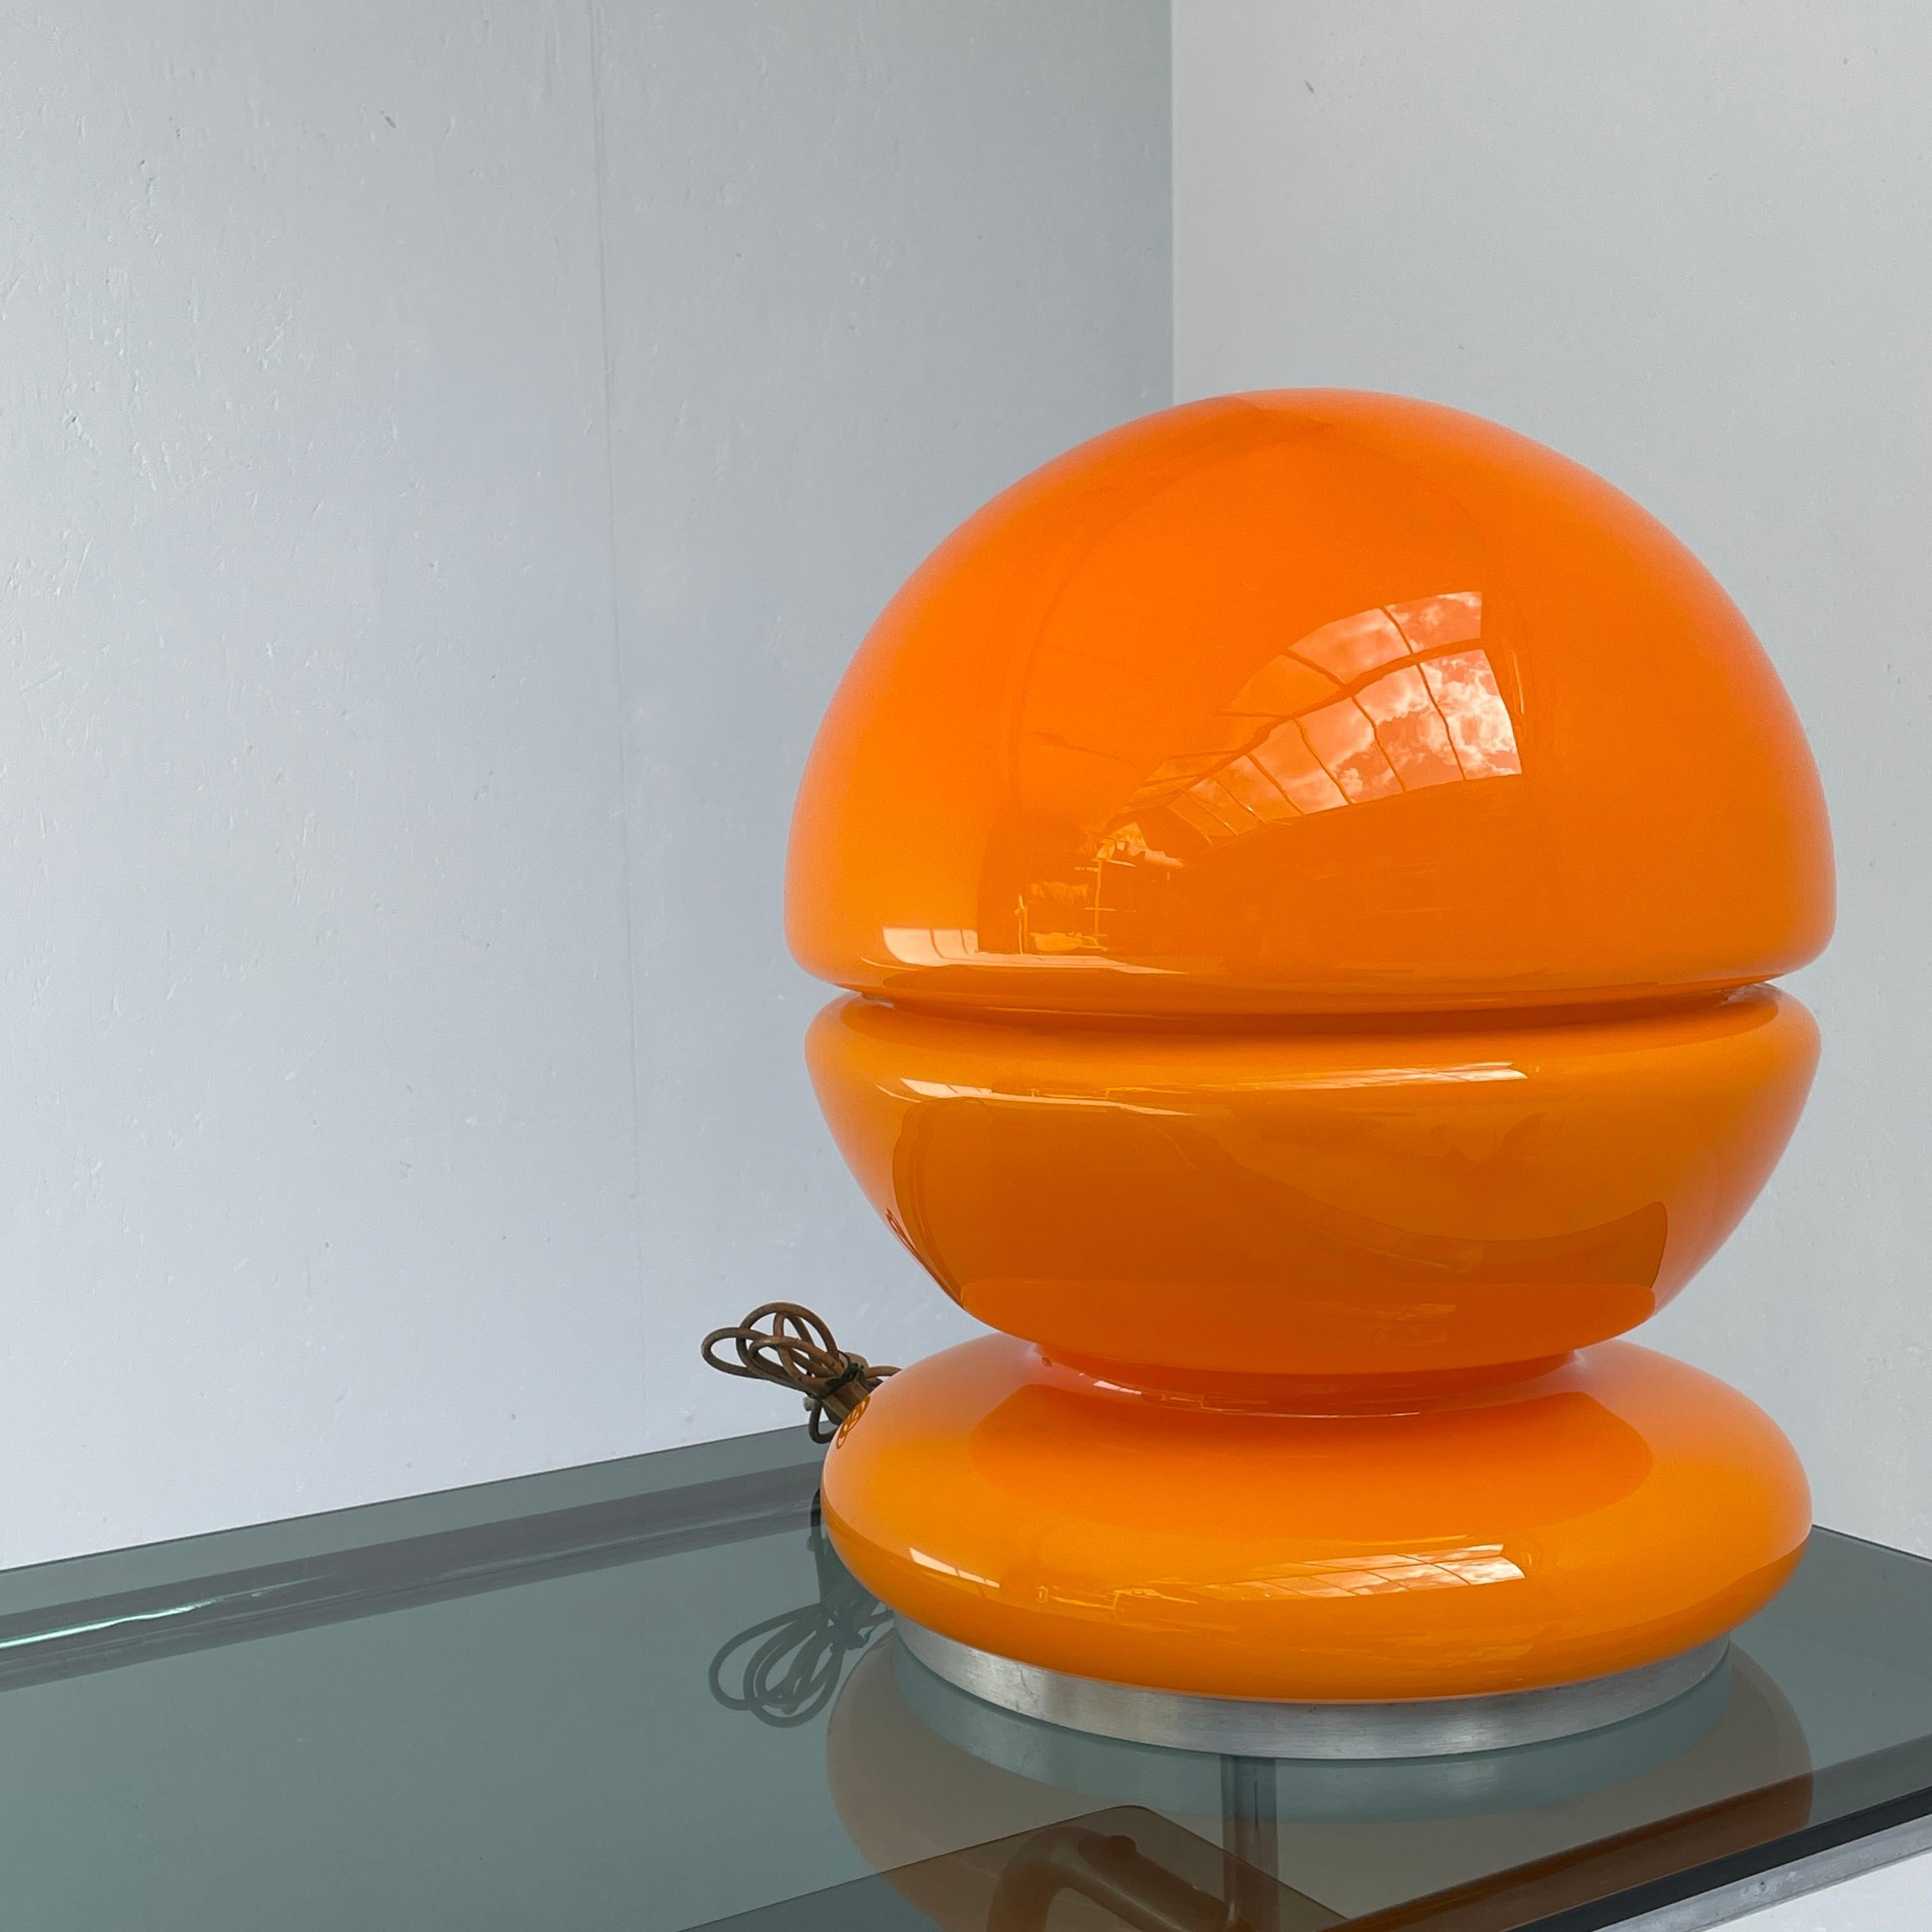 Space age floor or table lamp. In the style of Carlo Nason for Mazzega. Italian production from the 60' - 70s. This lamp has the perfect size to be placed on the floor or table and provide a very cozy and diffused ambient lighting. Orange blown